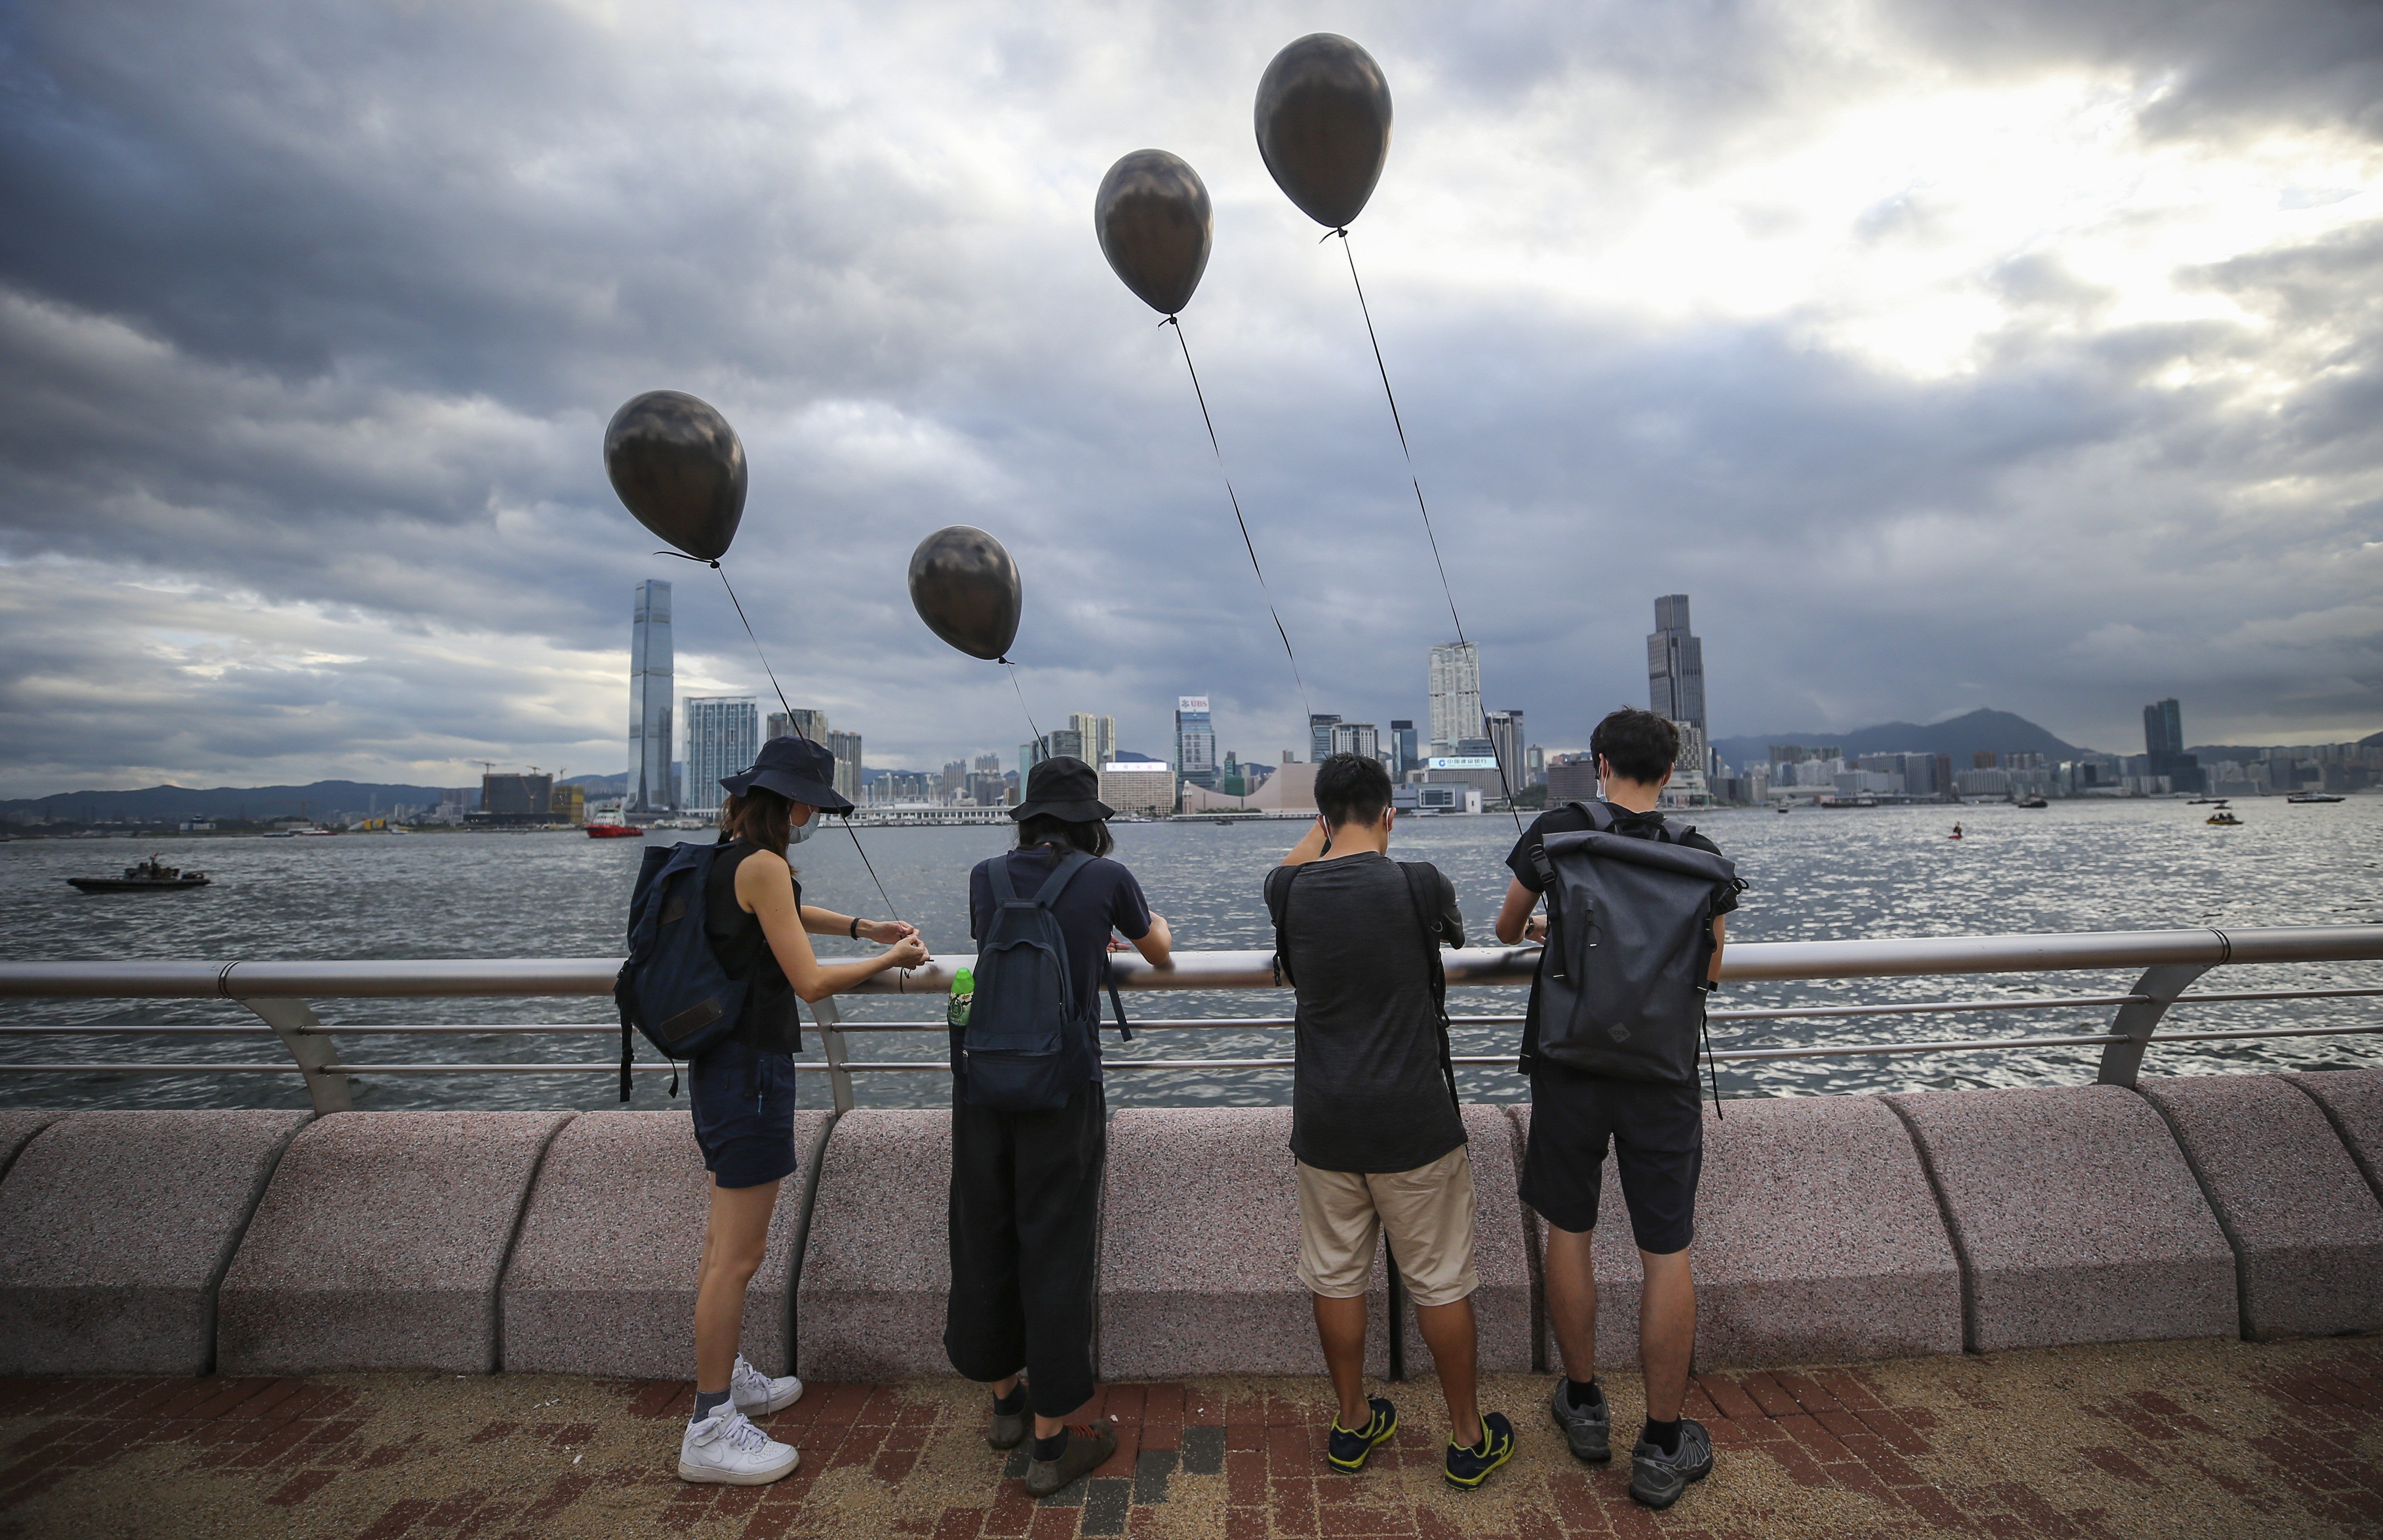 Protesters tie black balloons to the railing at the Wan Chai harbourfront during a protest against the extradition bill on July 1. The protests have continued for over seven months, with Hong Kong slipping into recession in October 2019. Photo: Winson Wong